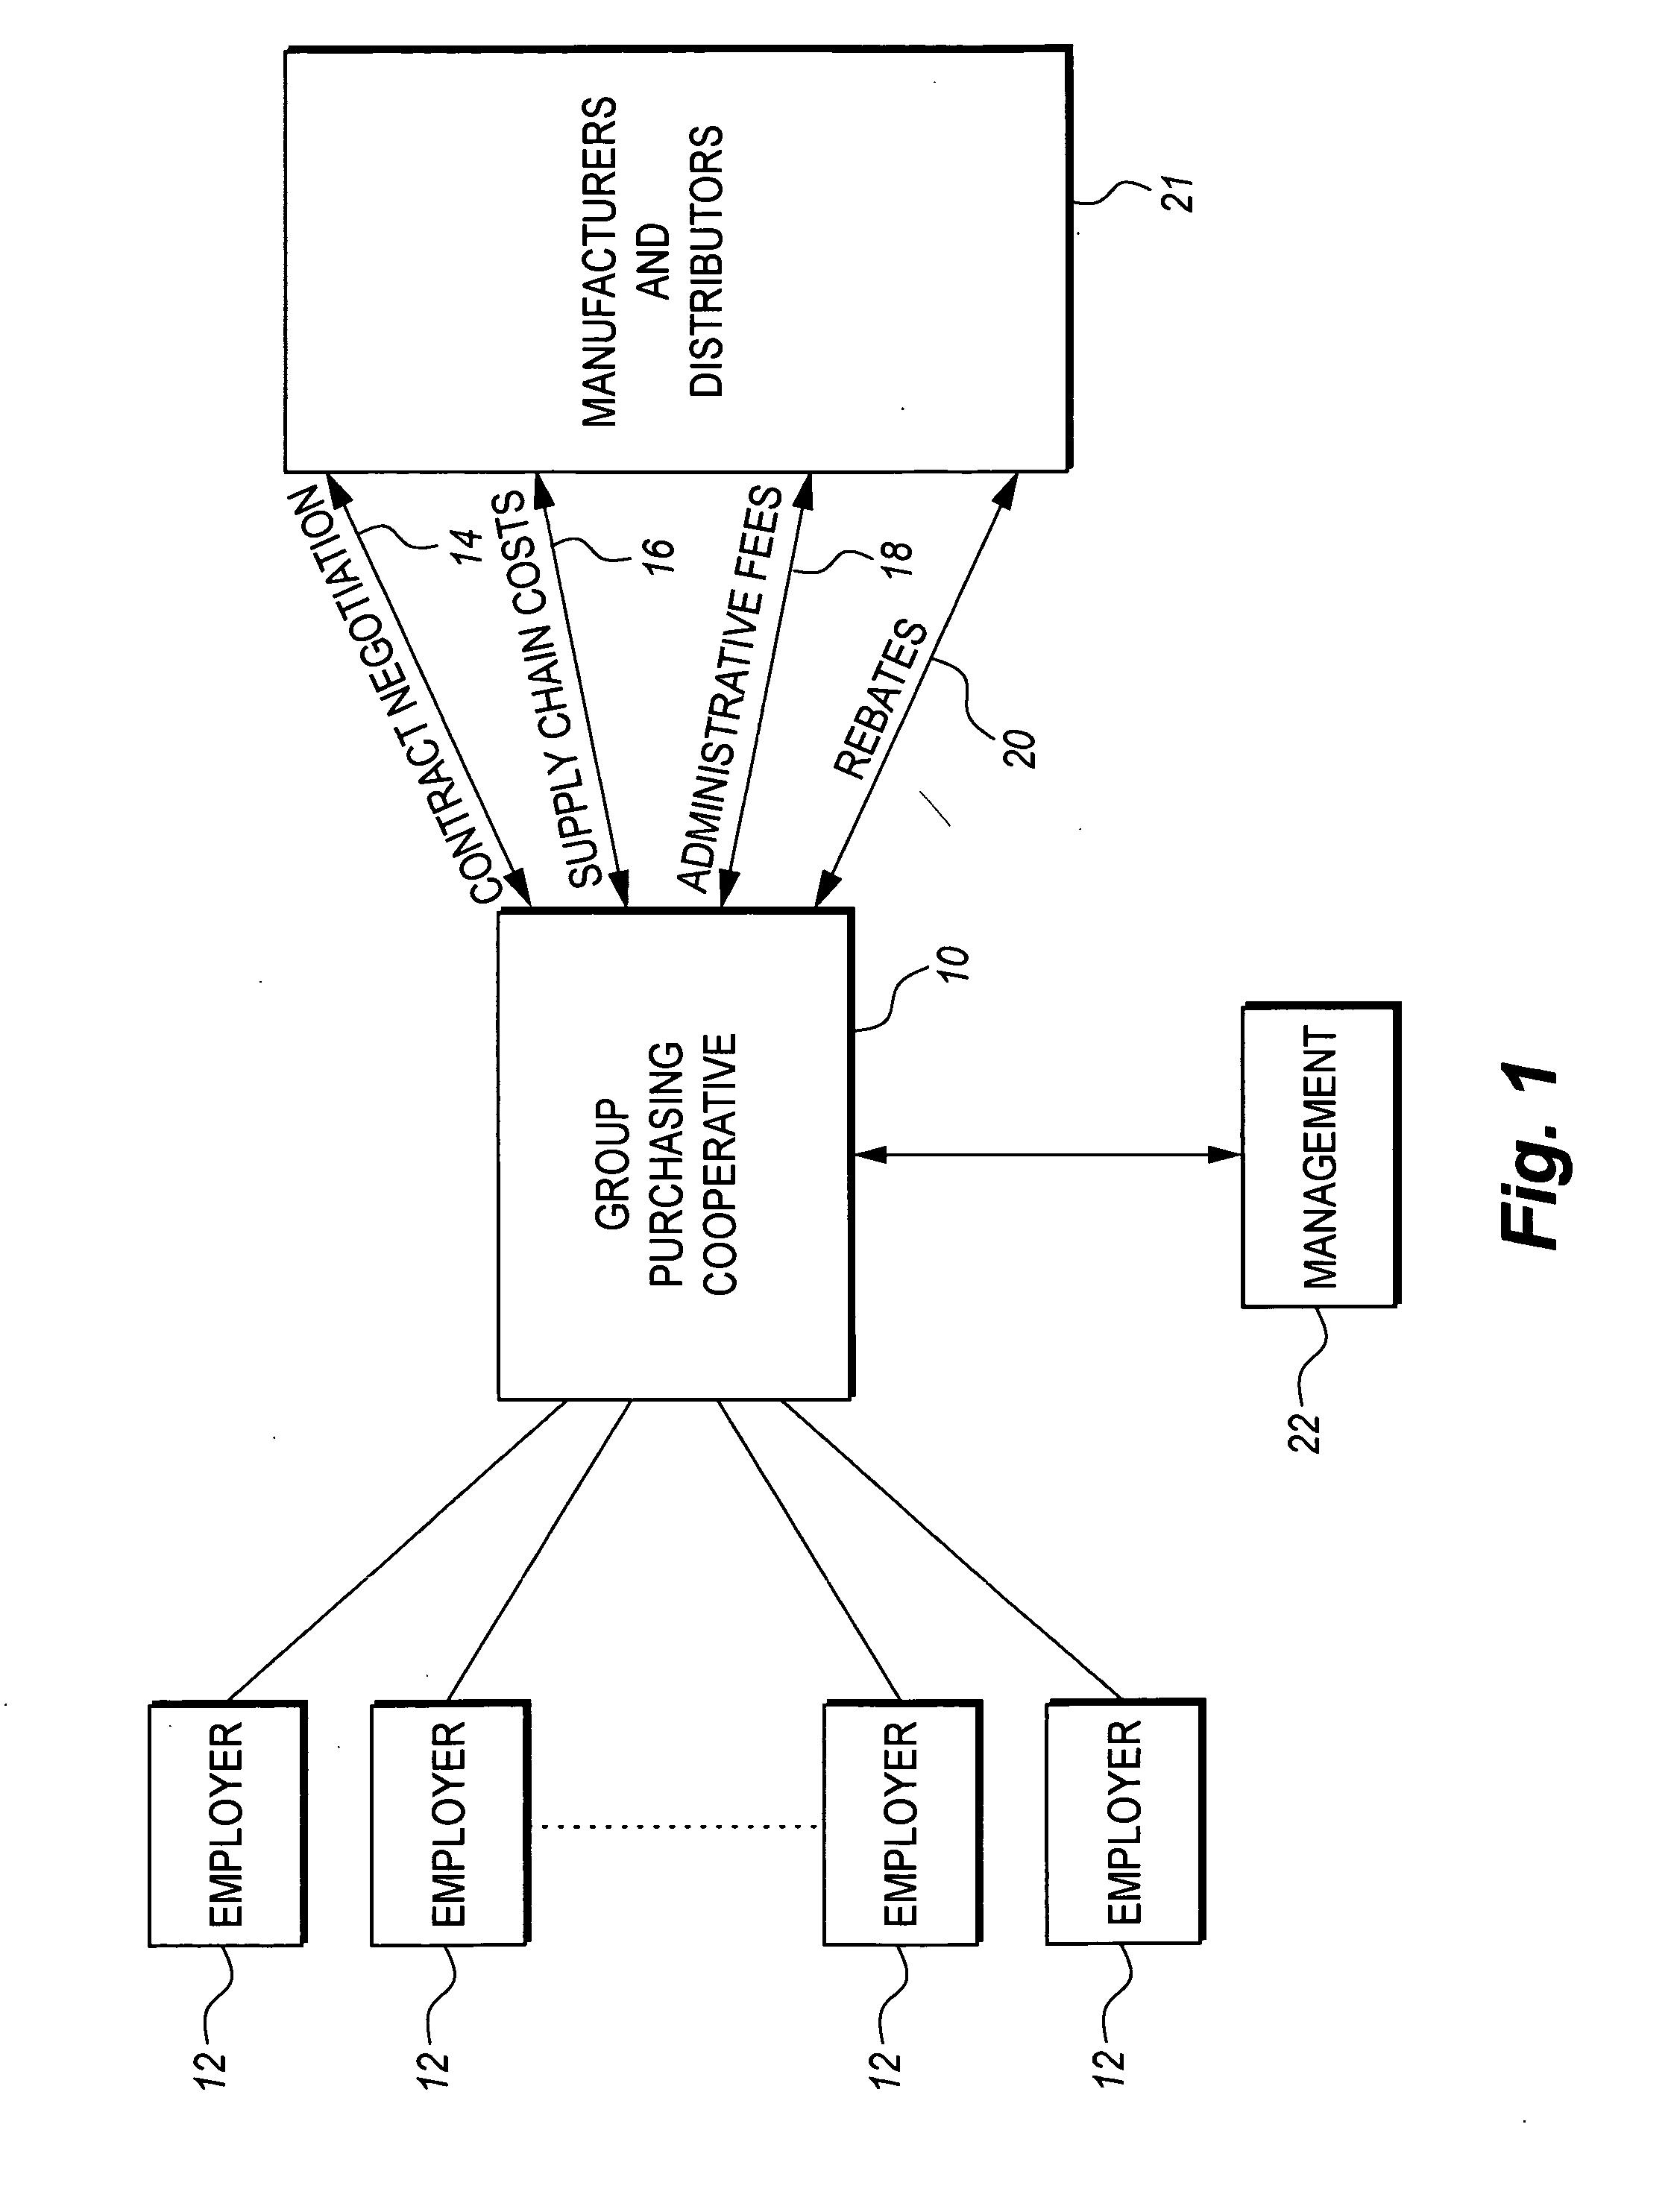 Method of managing and providing healthcare